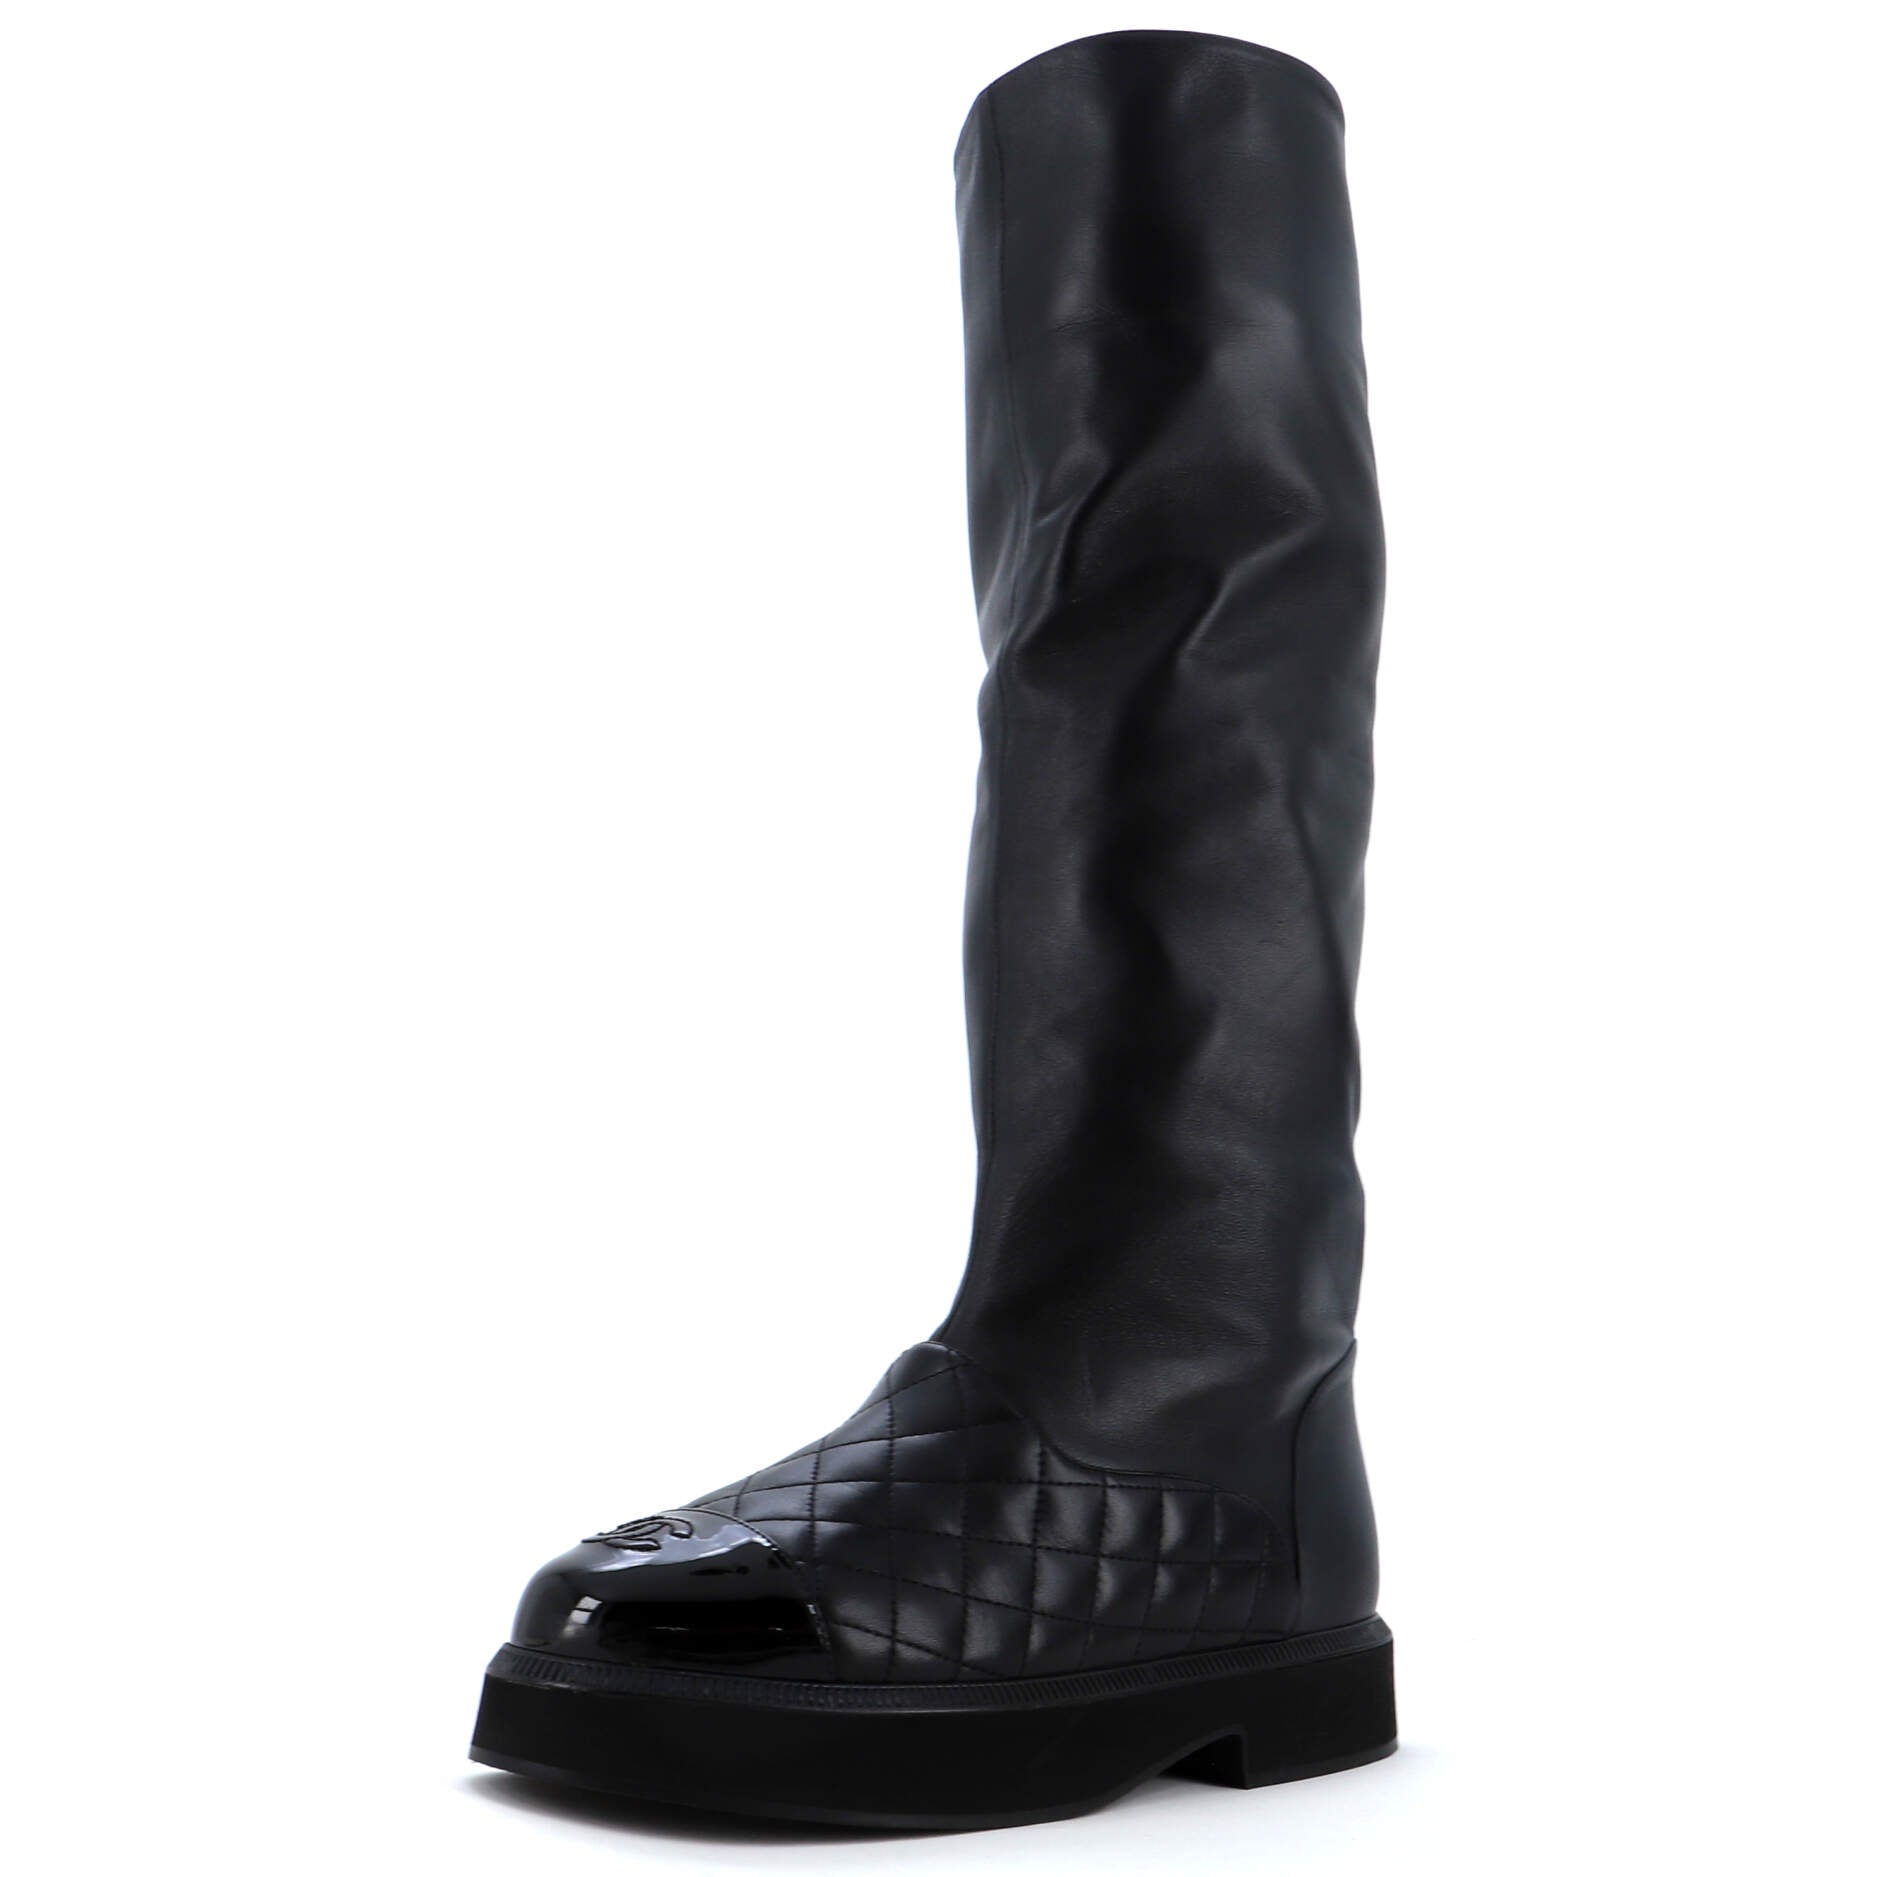 Women's CC Cap Toe Knee High Boots Quilted Leather with Patent and Knit